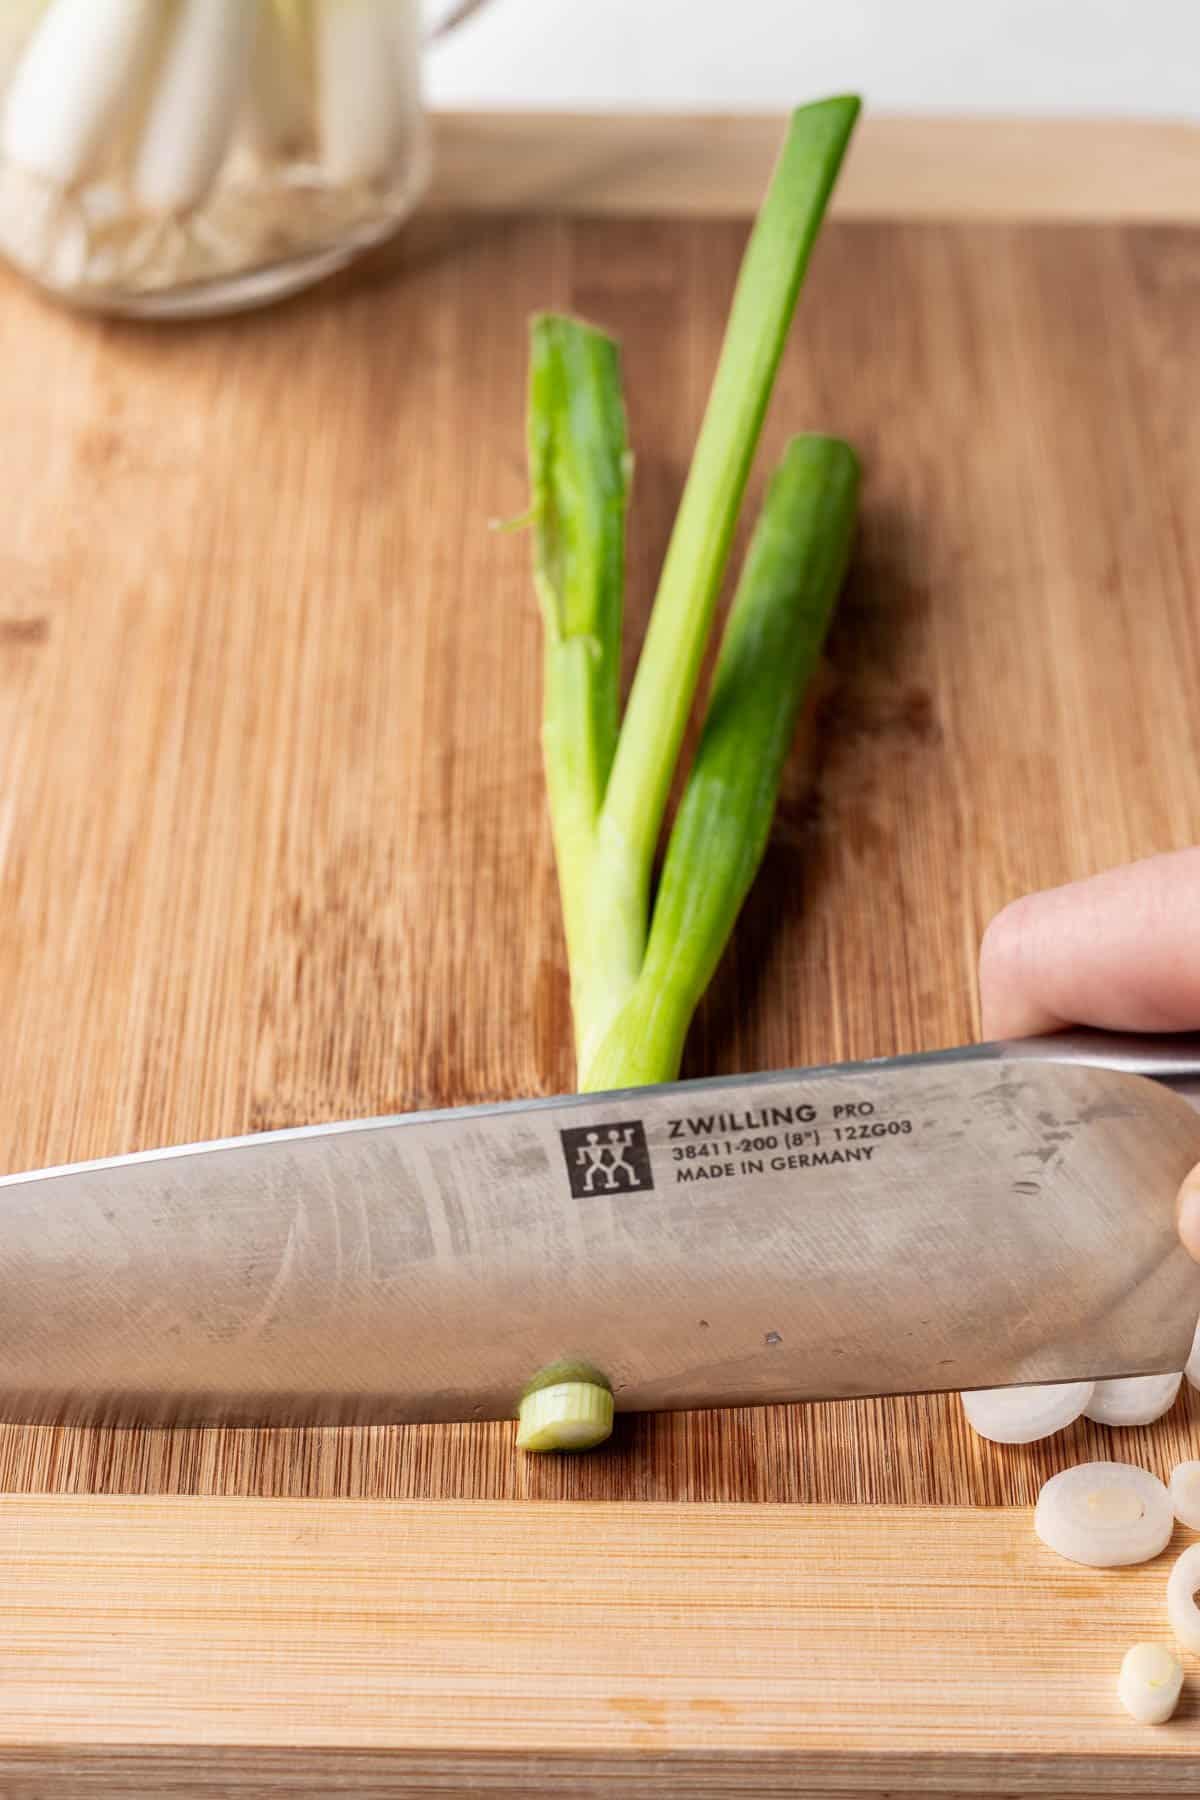 A knife slicing the white part of a green onion.